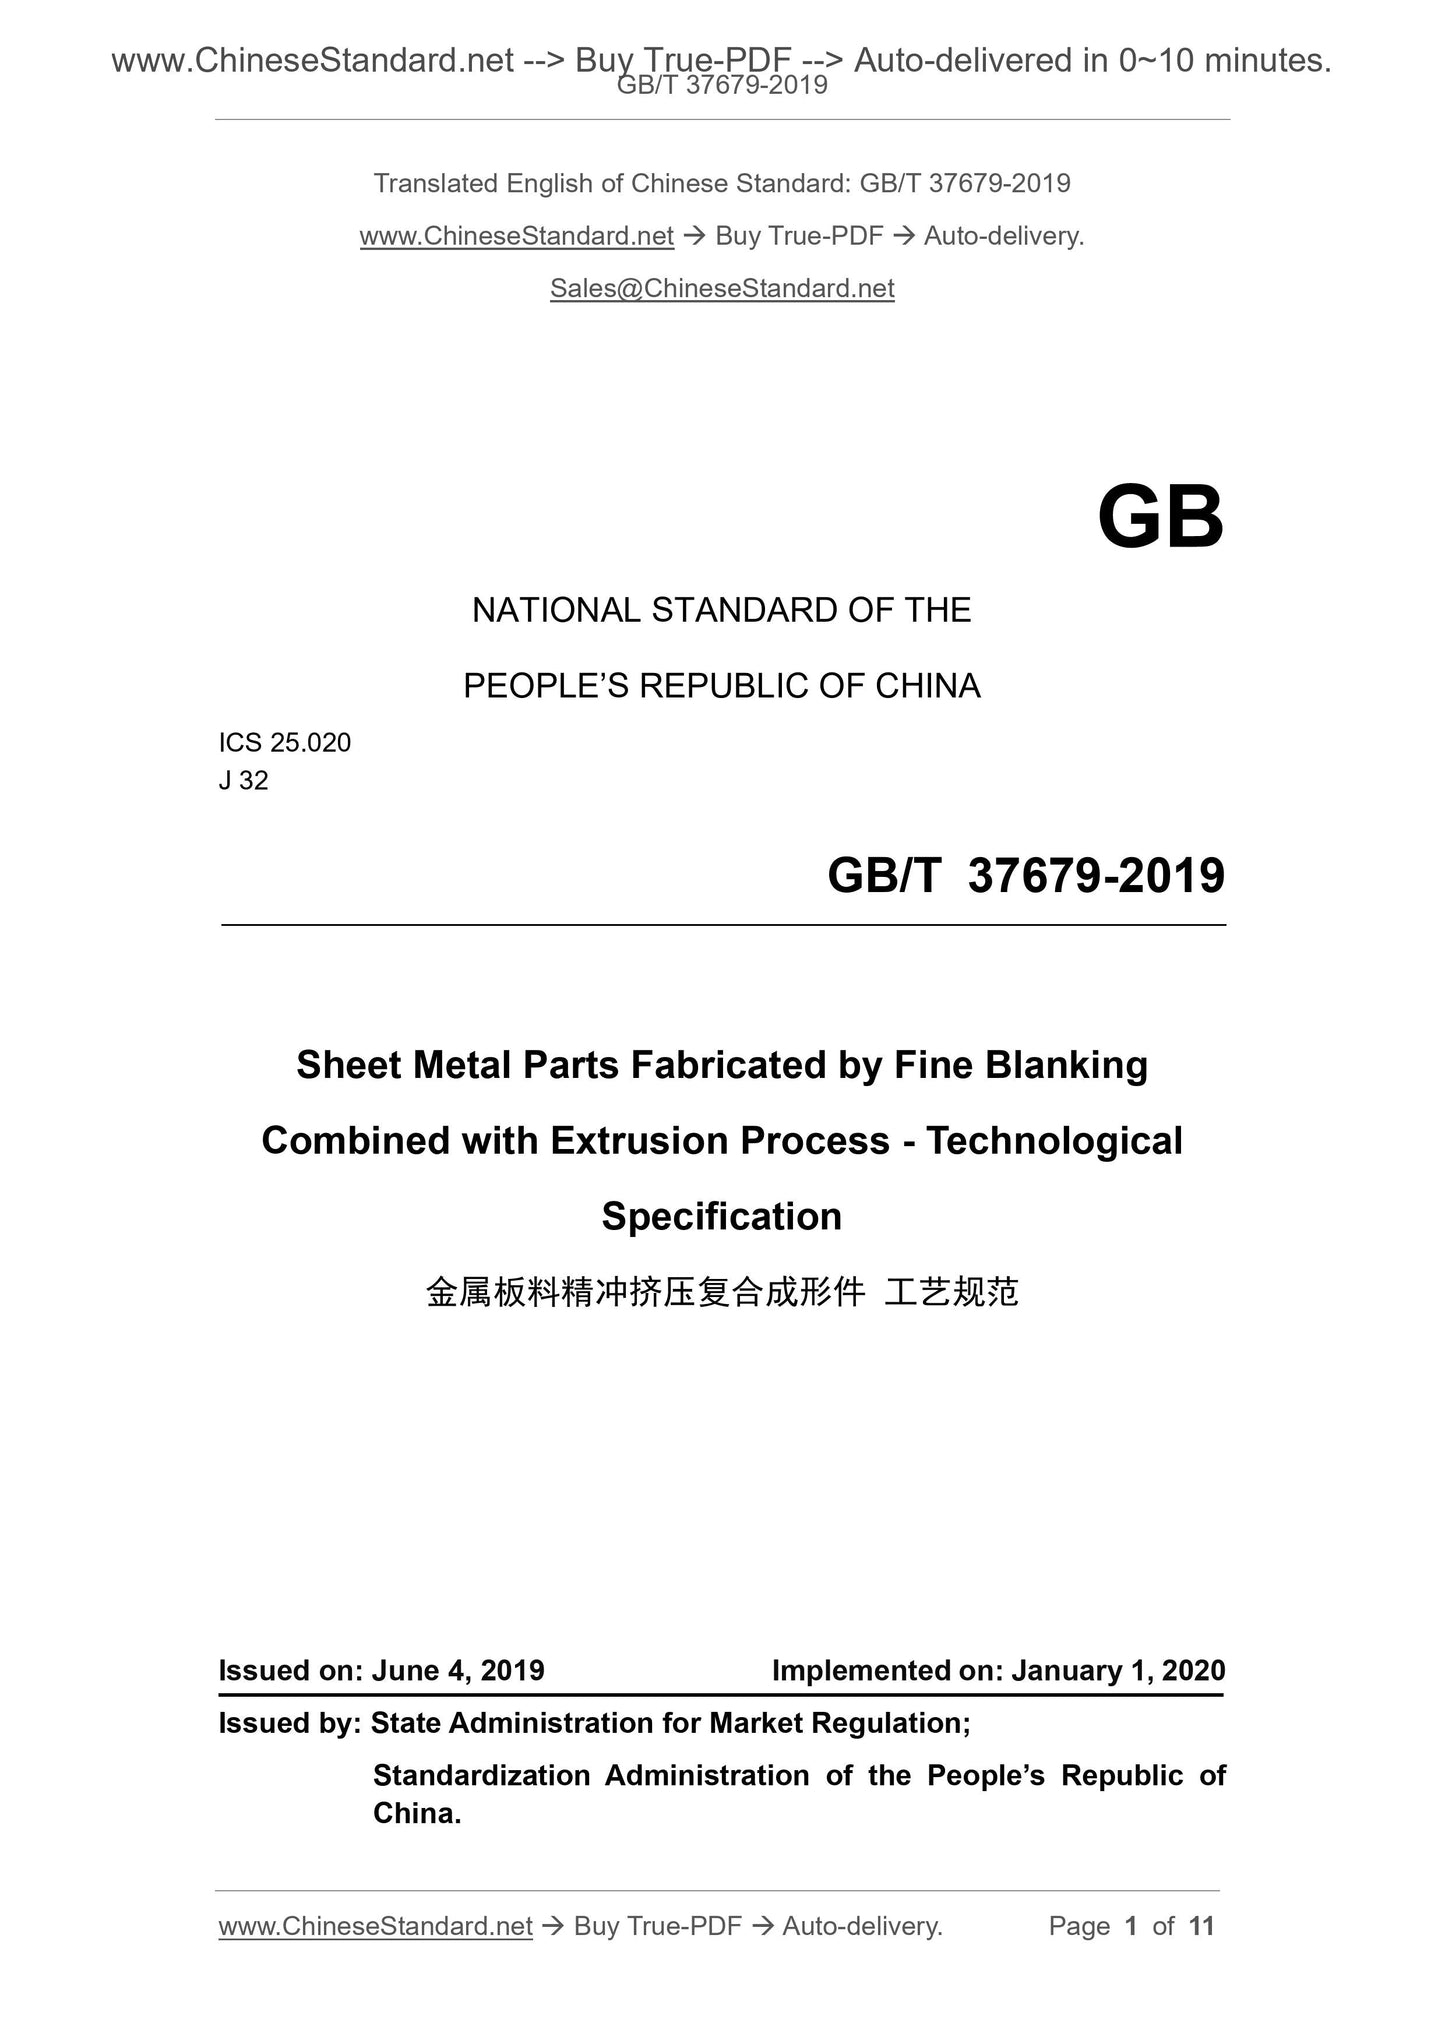 GB/T 37679-2019 Page 1